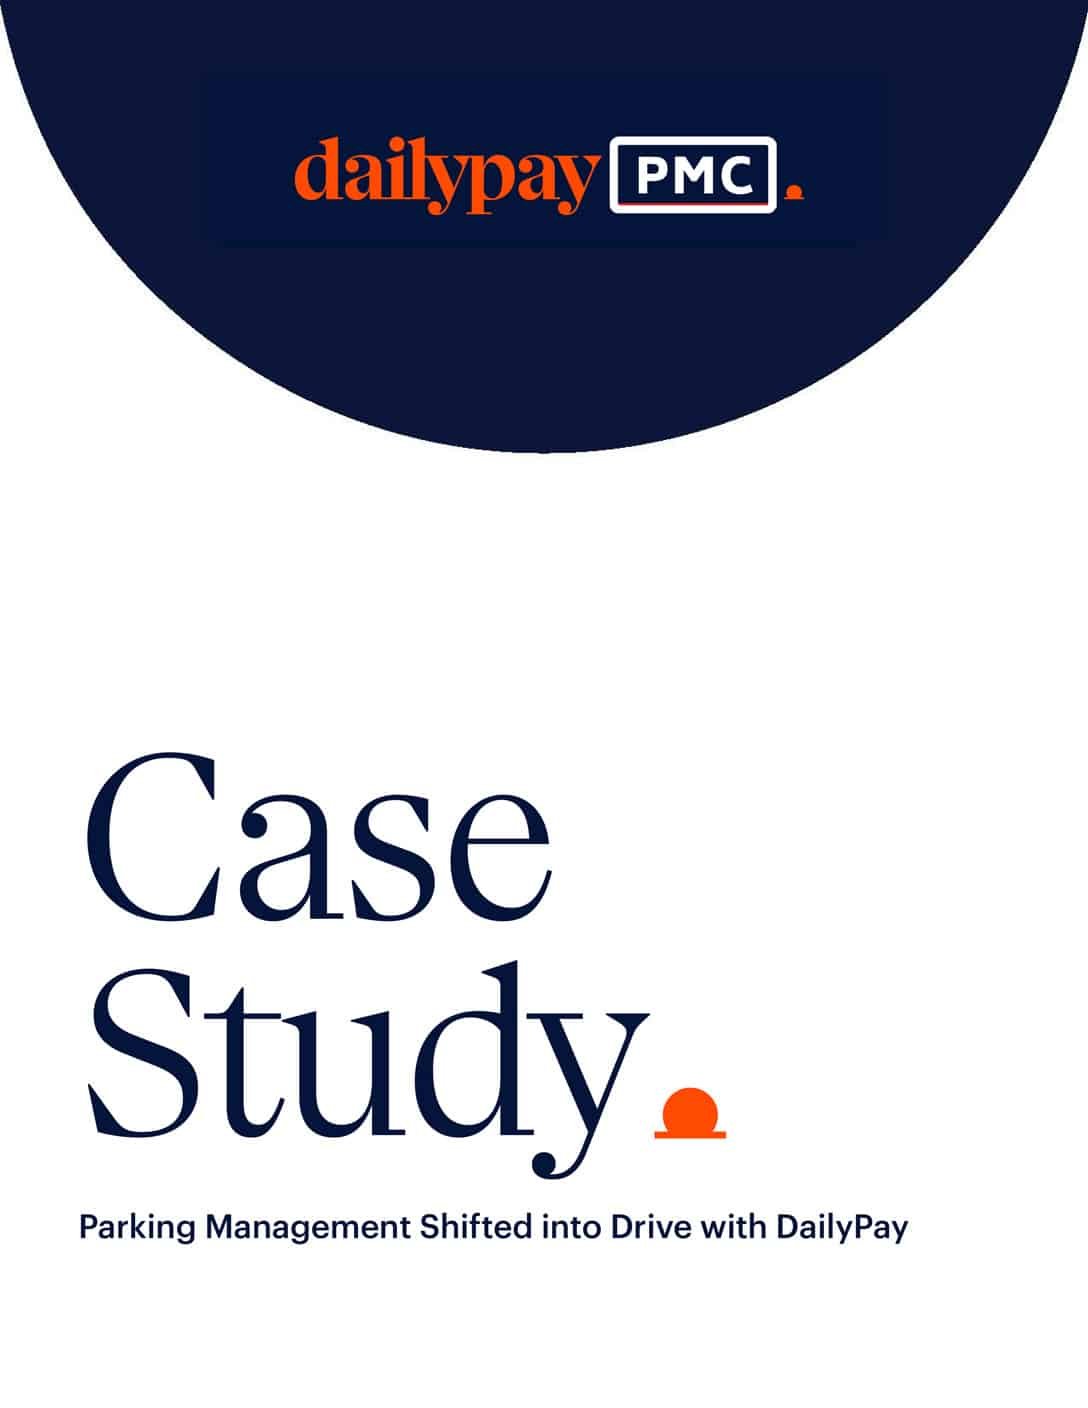 A dark blue banner at the top features the DailyPay and PMC logos. Below, in large navy-blue text, it reads “Case Study.” Smaller text underneath says, “Parking Management Shifted into Drive with DailyPay.” The background is white, and a small orange dot design appears near the text.